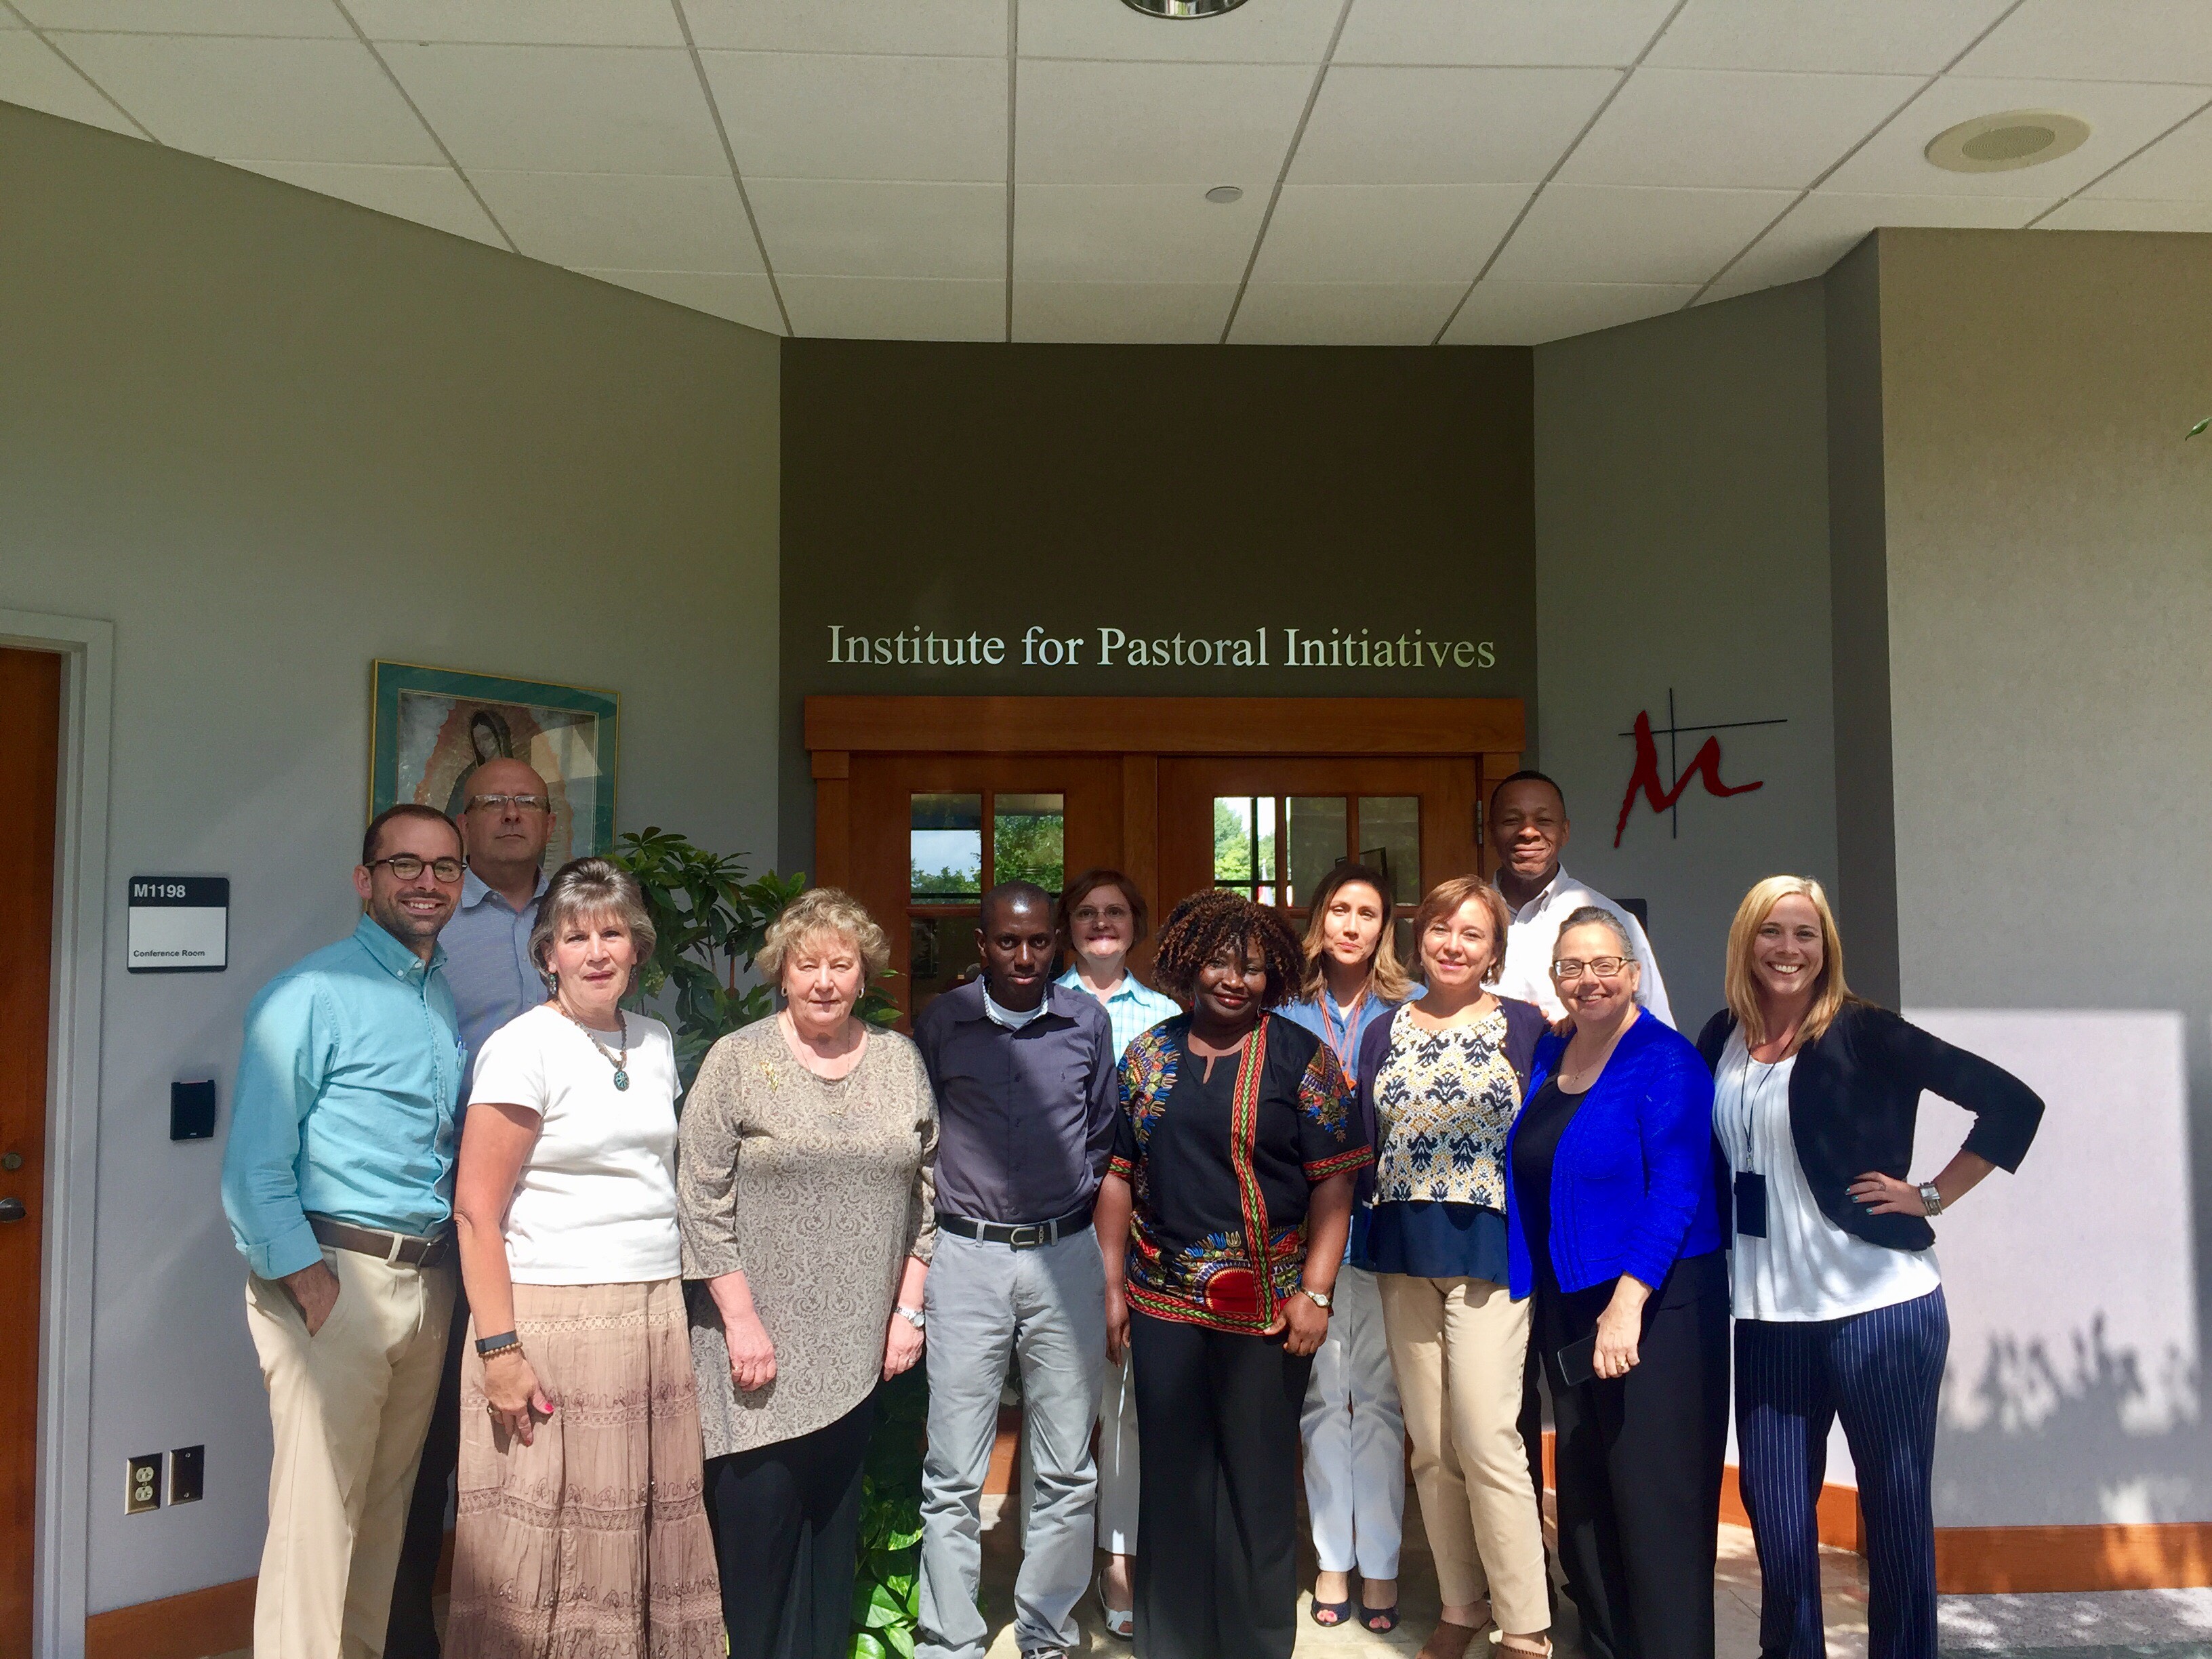 Ignatius Mvula with the IPI staff during his visit to Dayton in 2017.